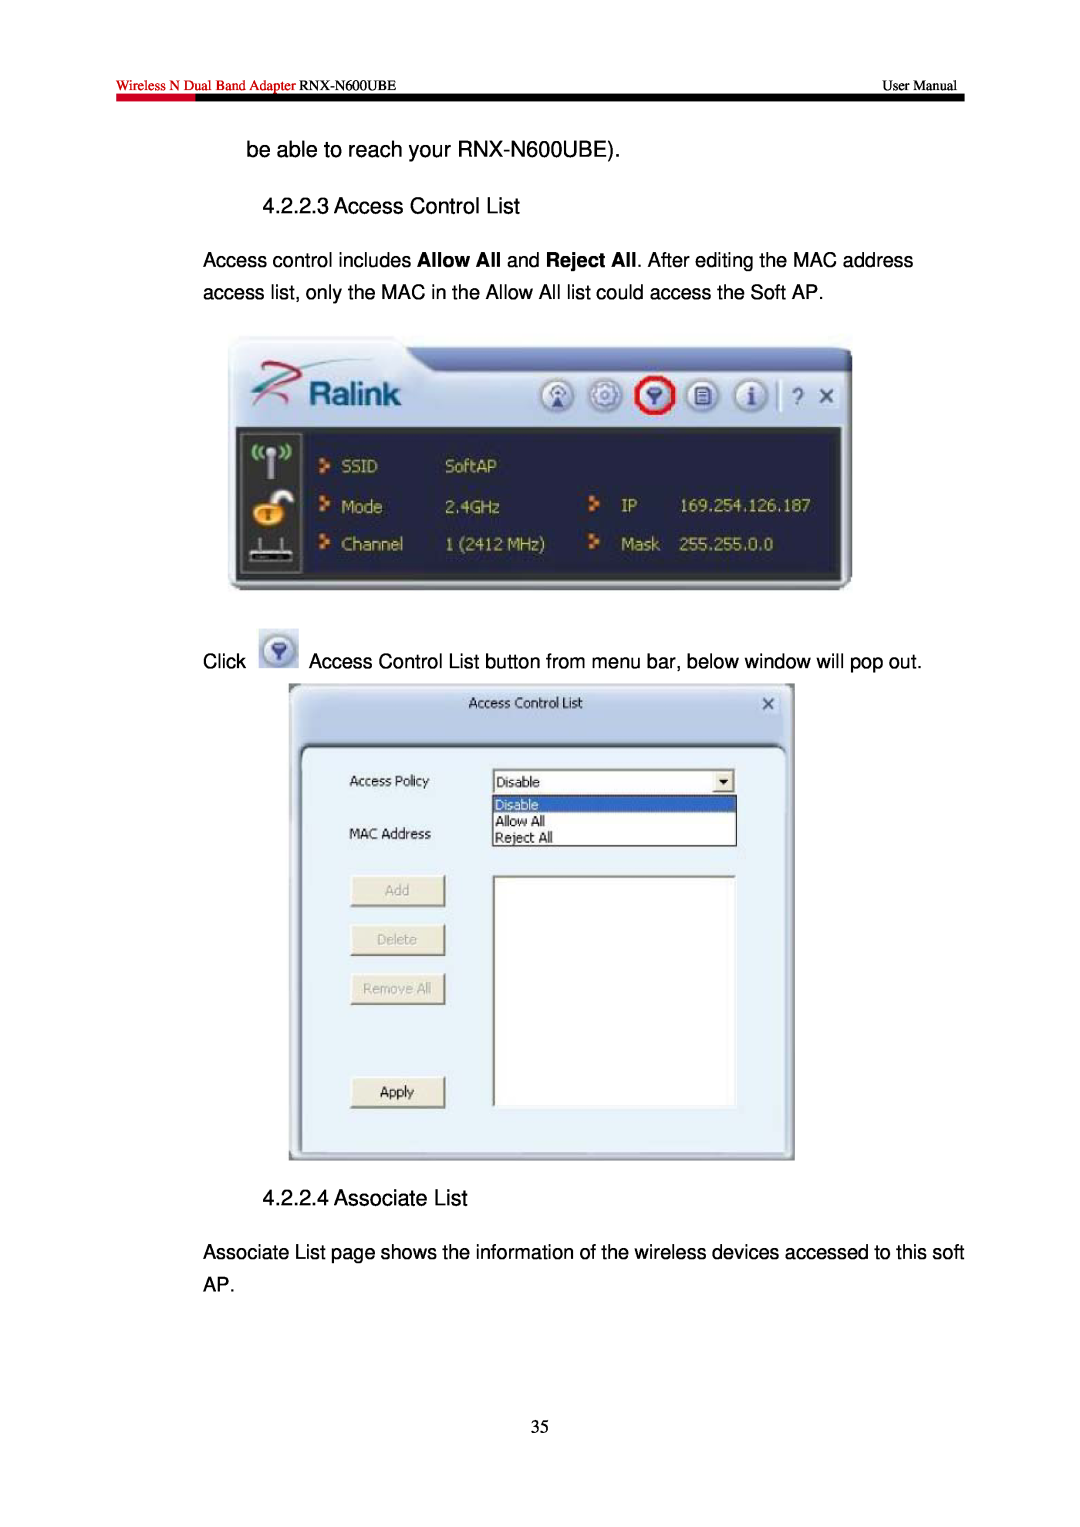 Rosewill user manual be able to reach your RNX-N600UBE 4.2.2.3 Access Control List, Associate List 